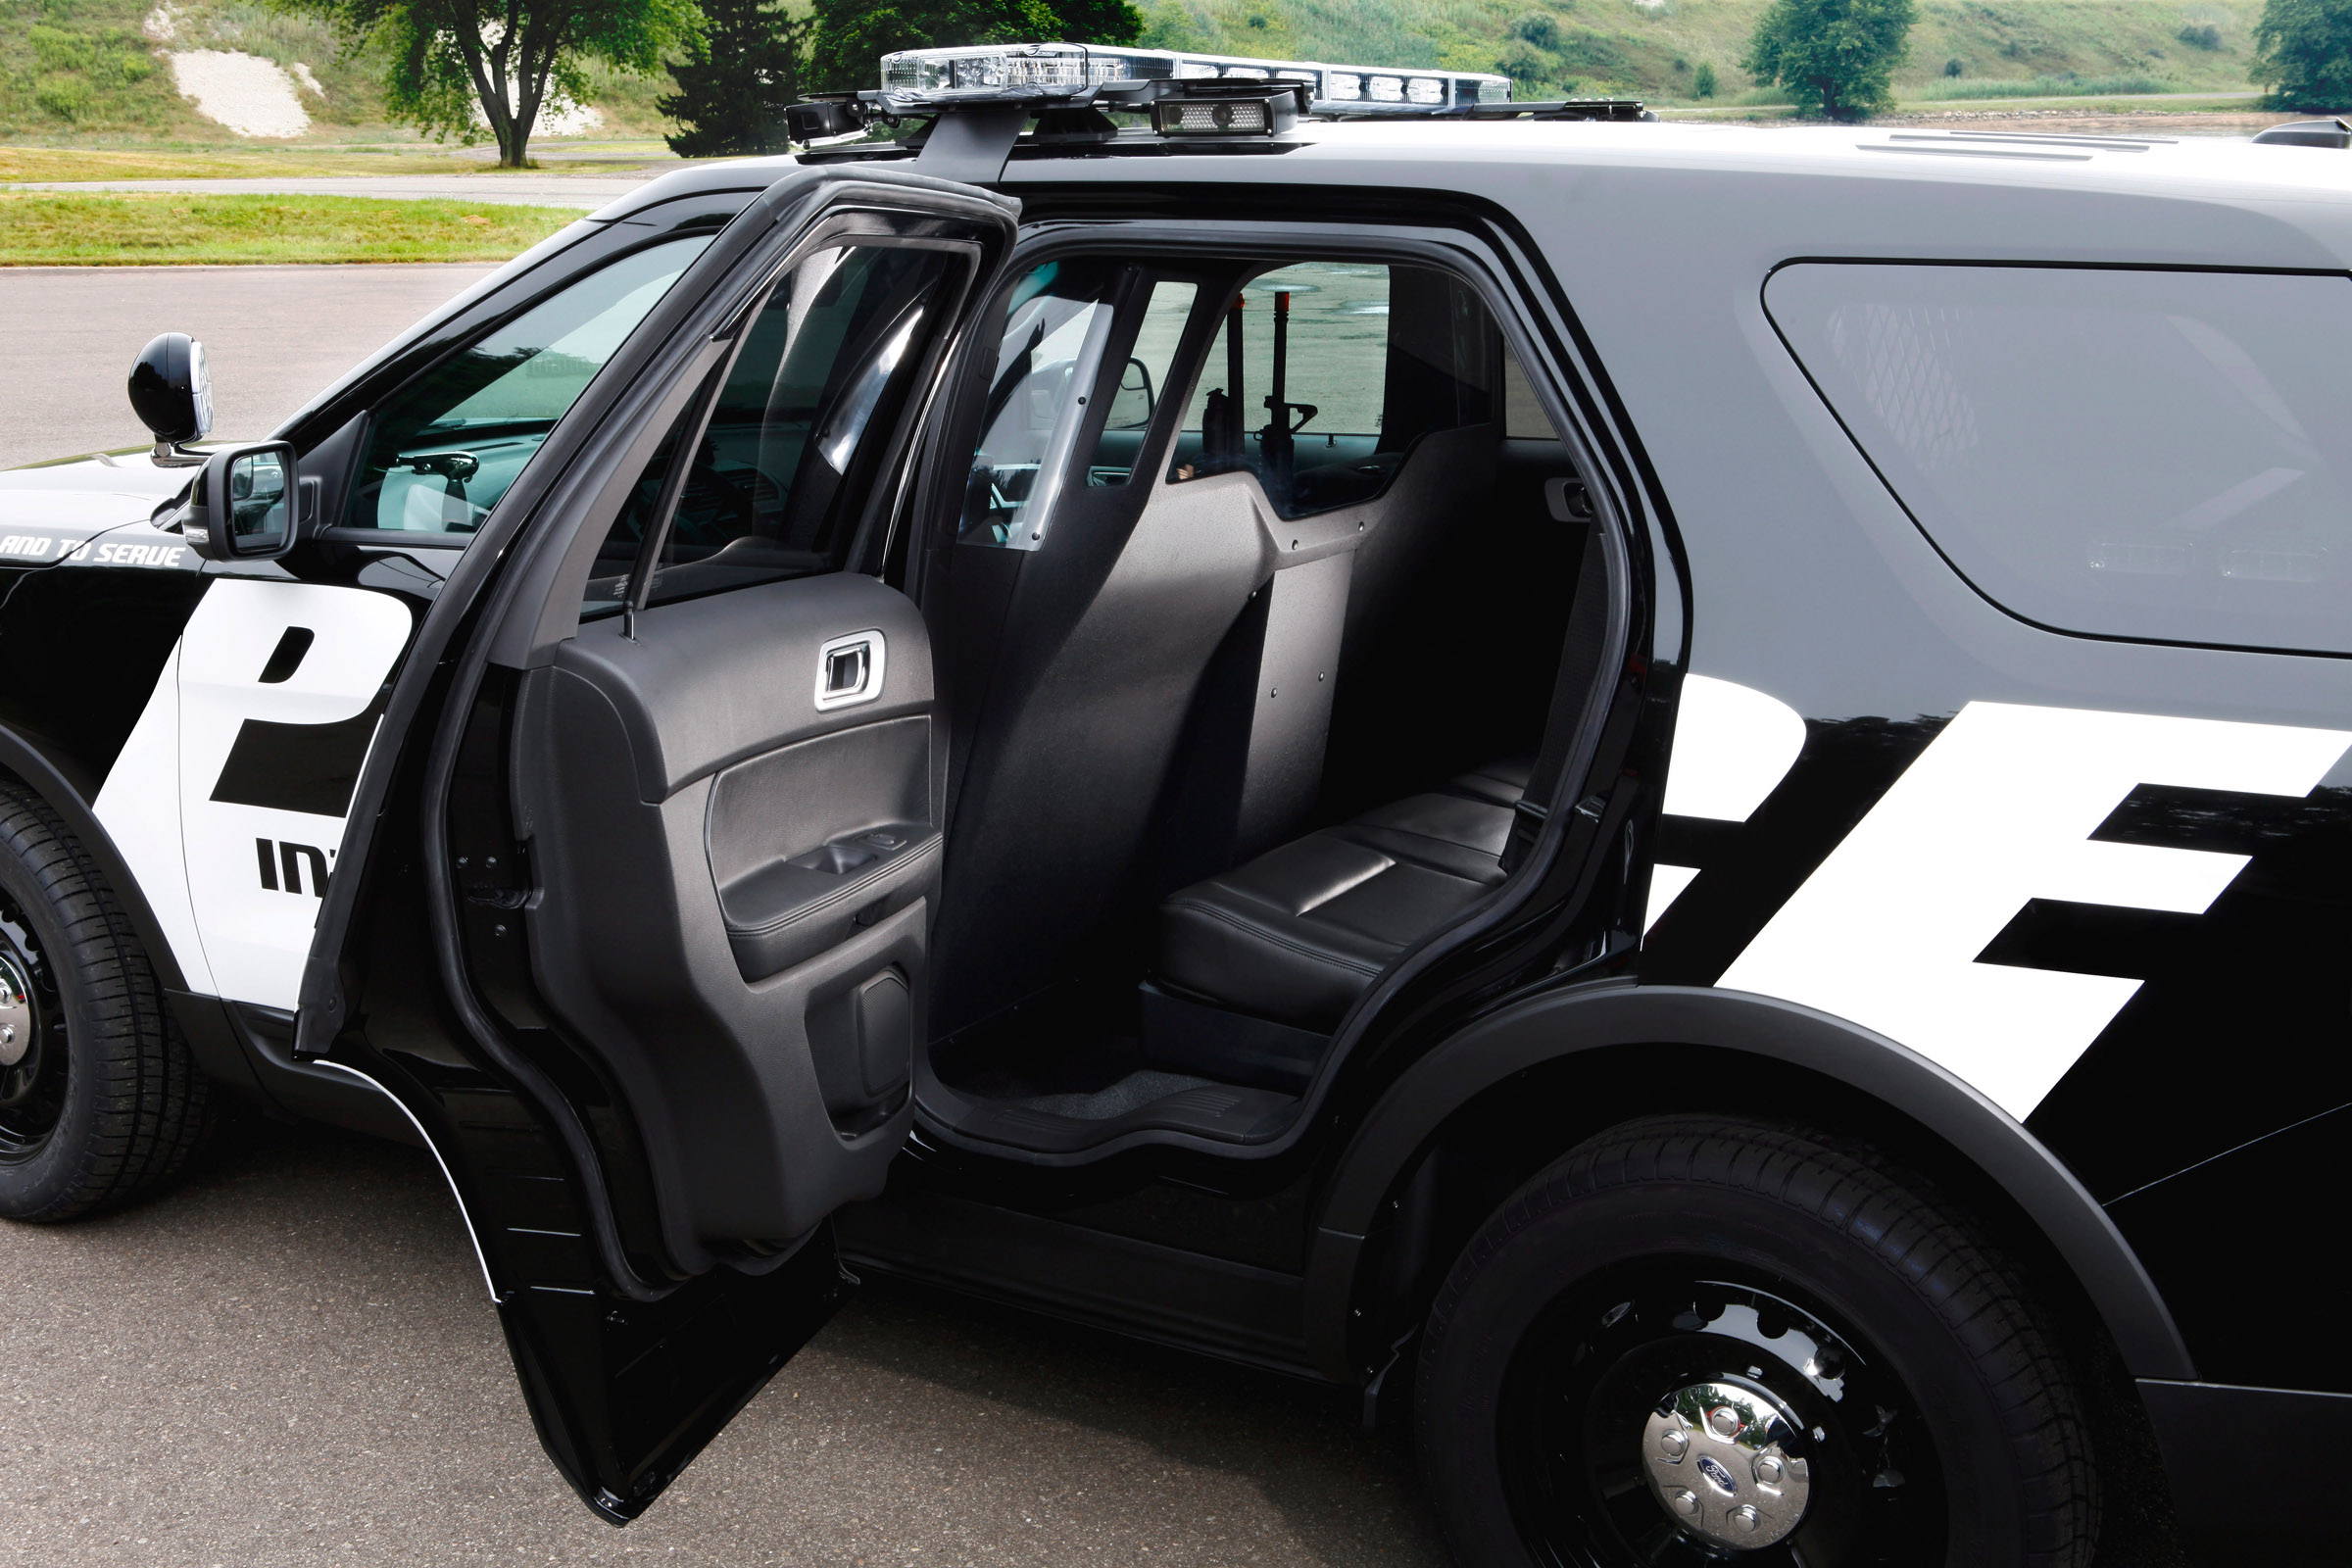 Ford with new bold crimefighter Ford Police Interceptor Utility Vehicle